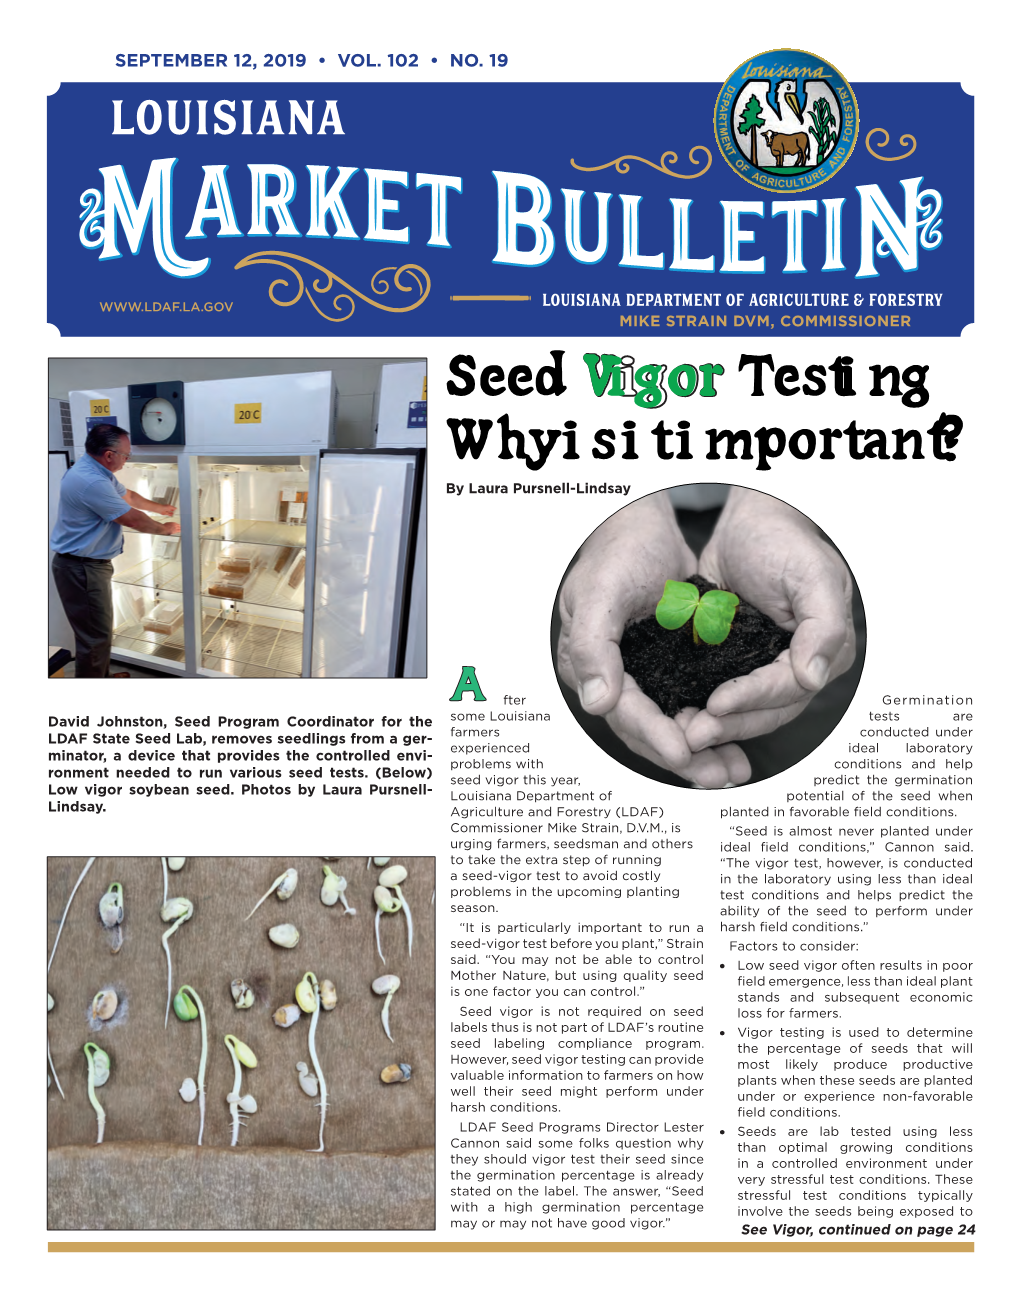 Seed Vigor Testing Why Is It Important? by Laura Pursnell-Lindsay